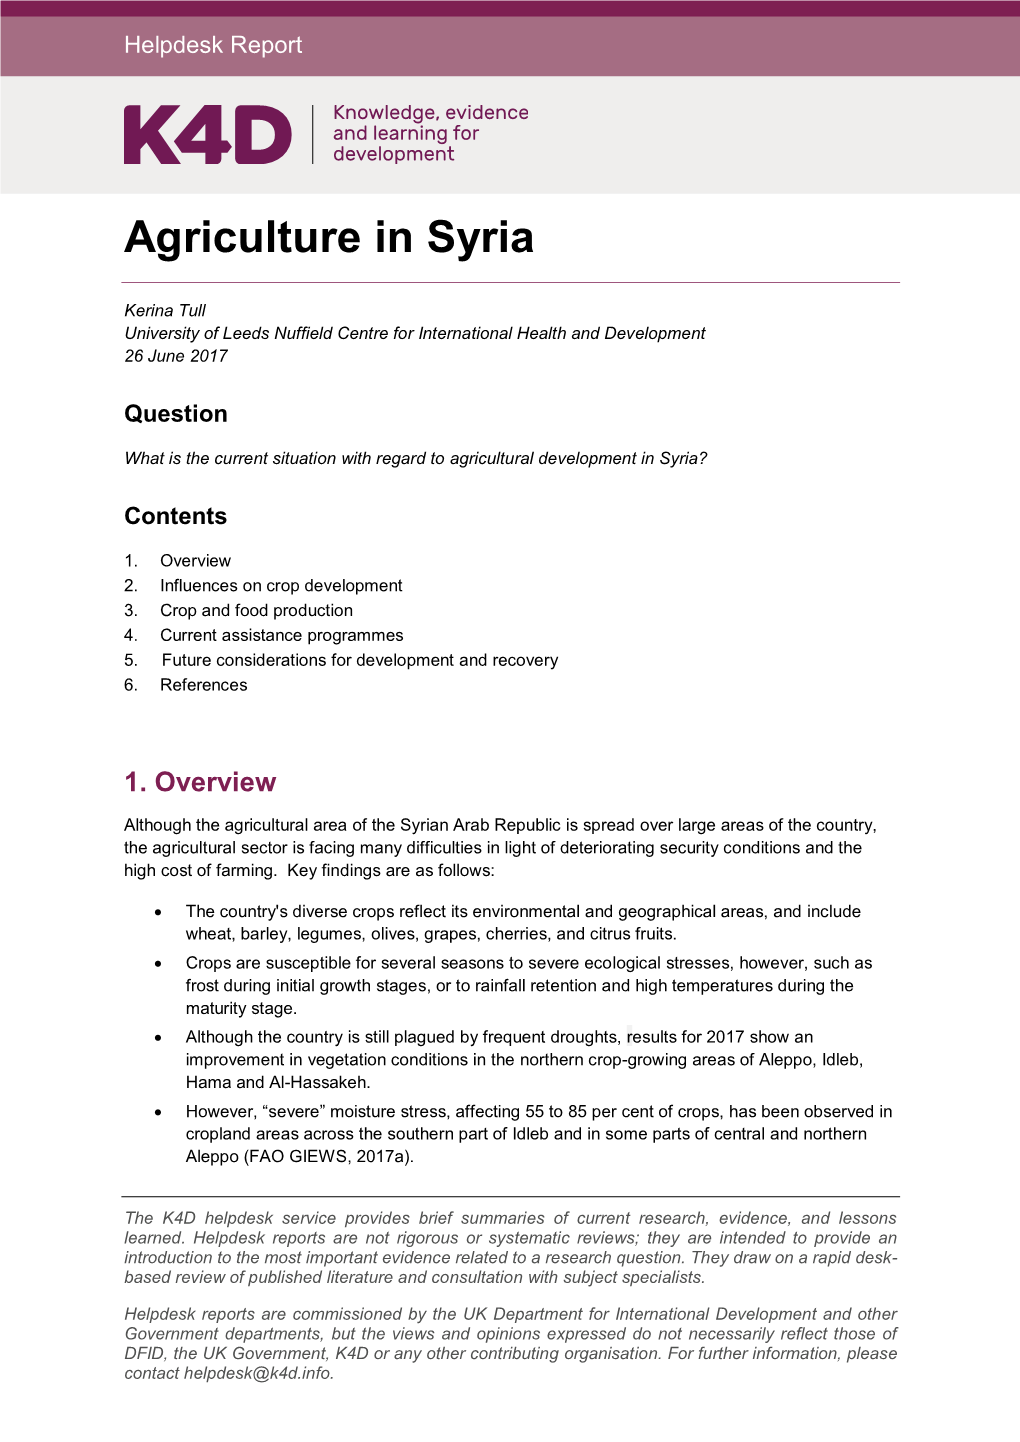 Agriculture in Syria